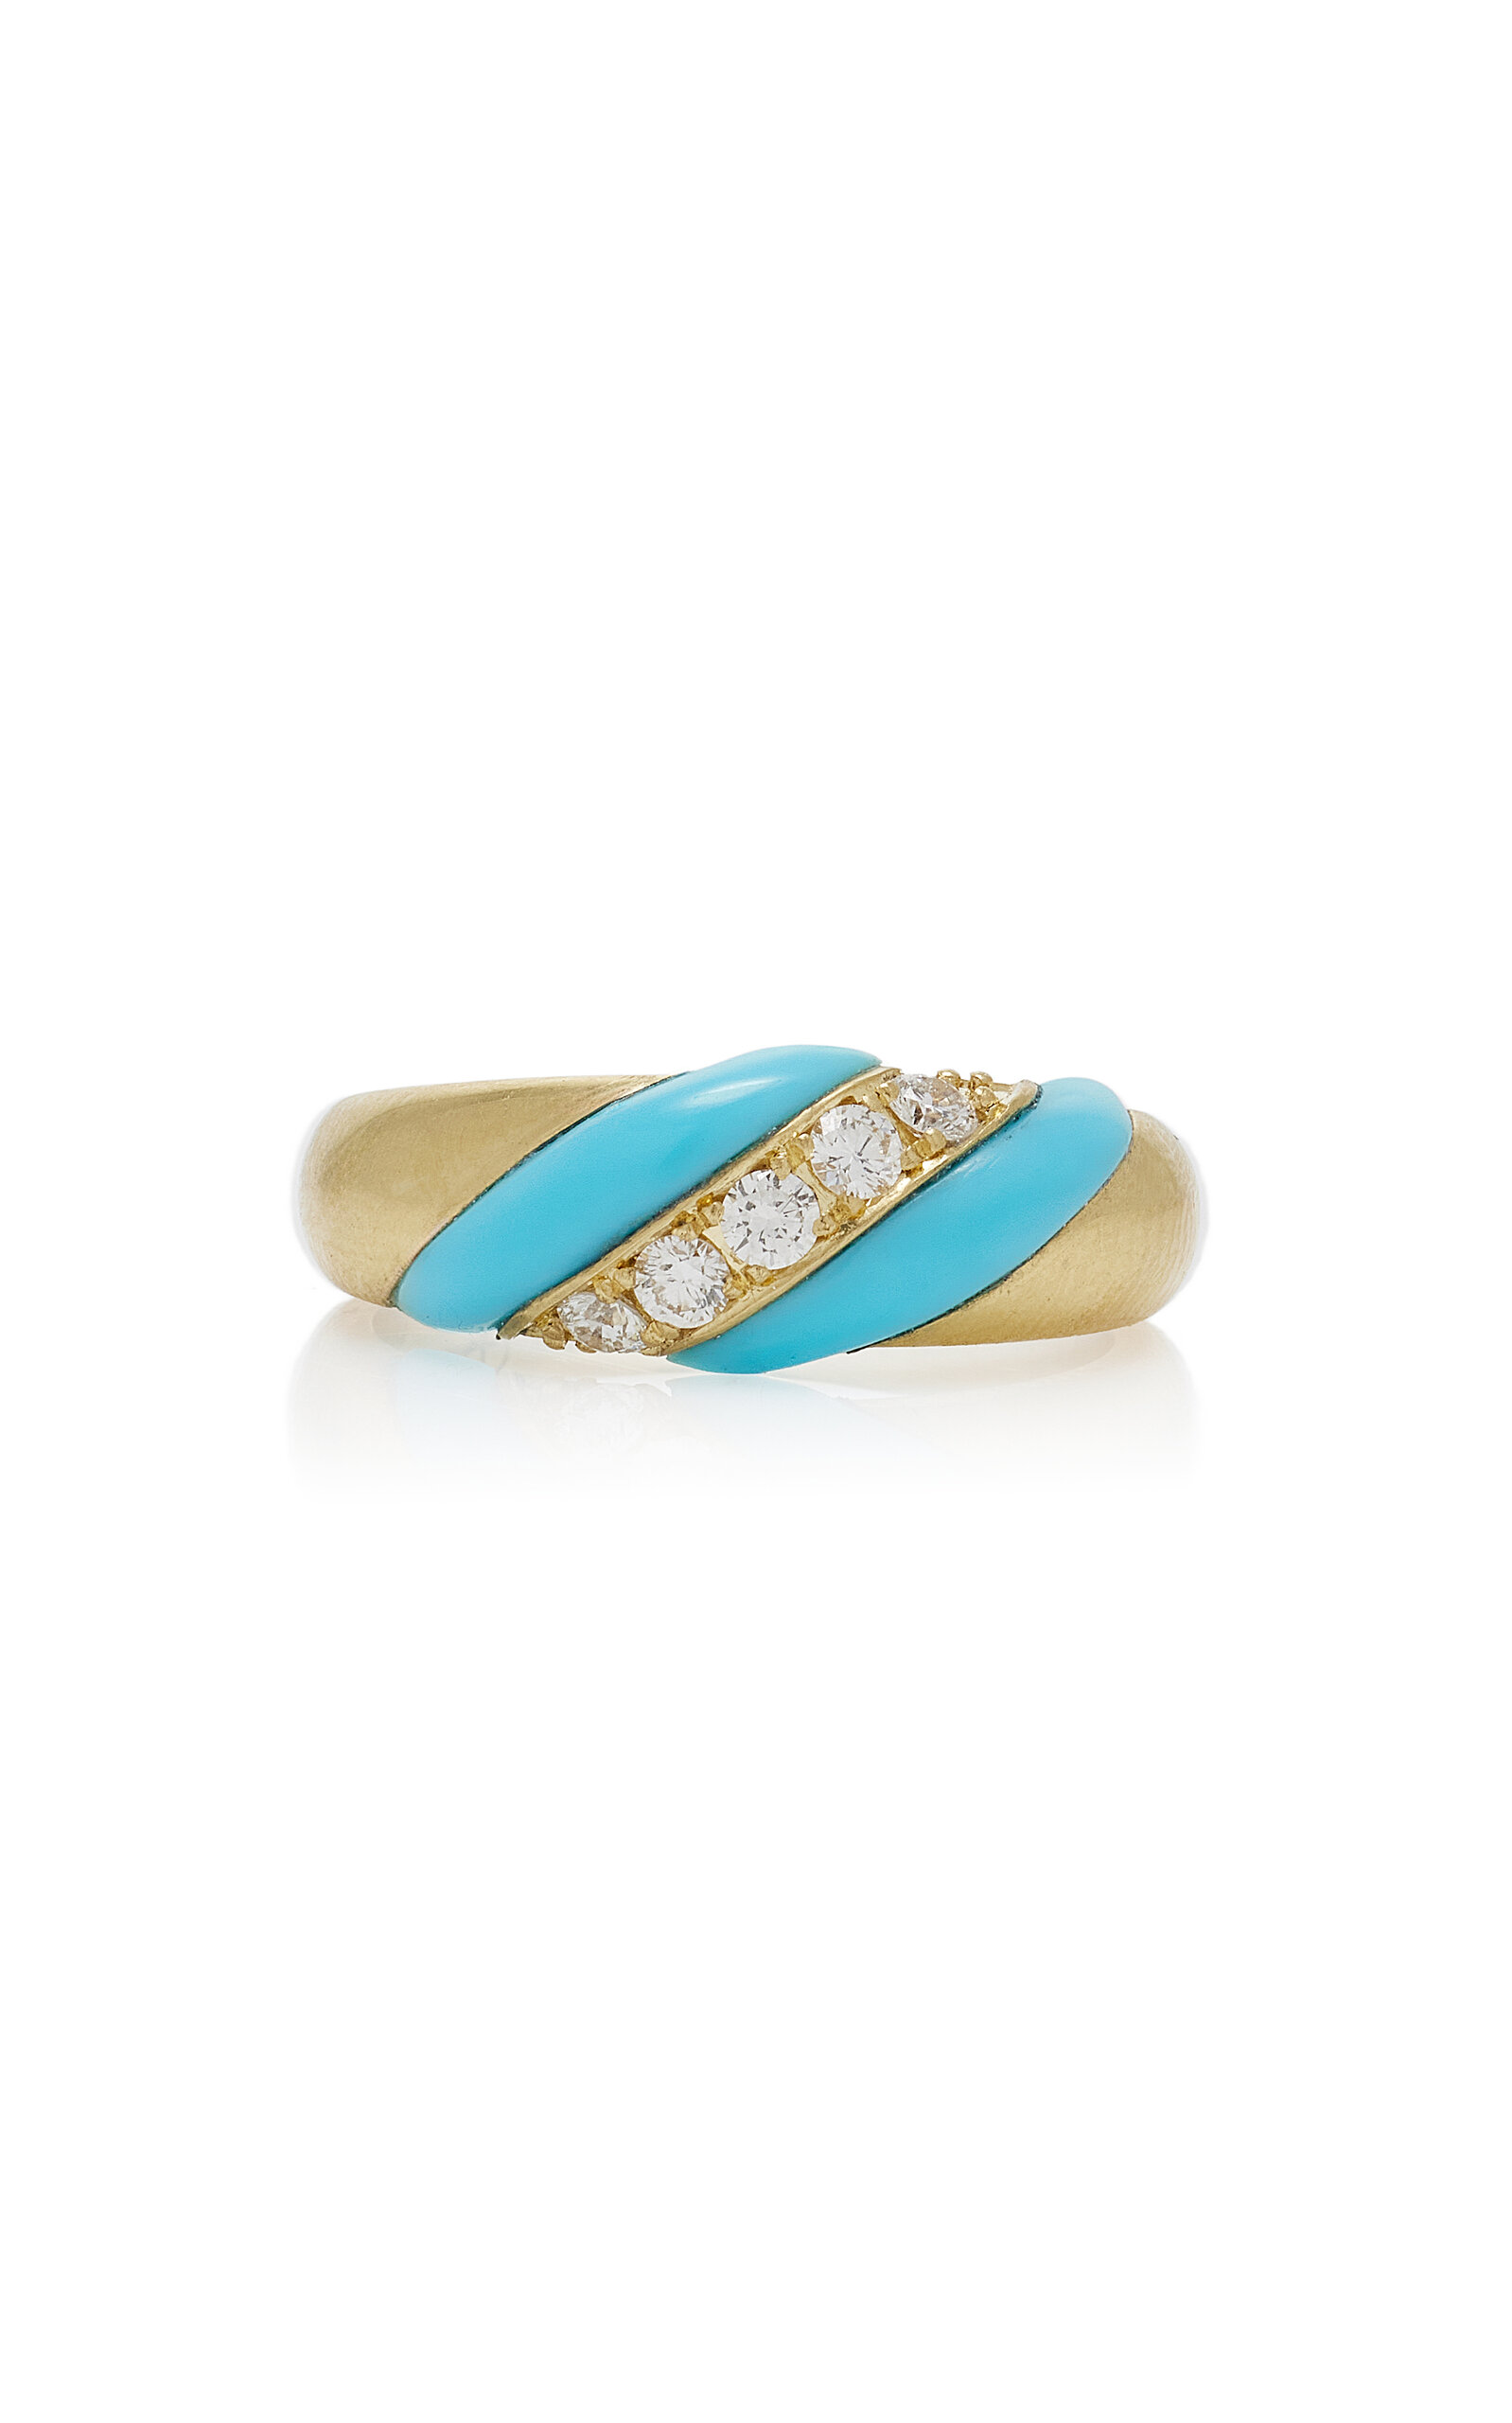 18K Yellow Gold; Diamond And Turquoise Ring